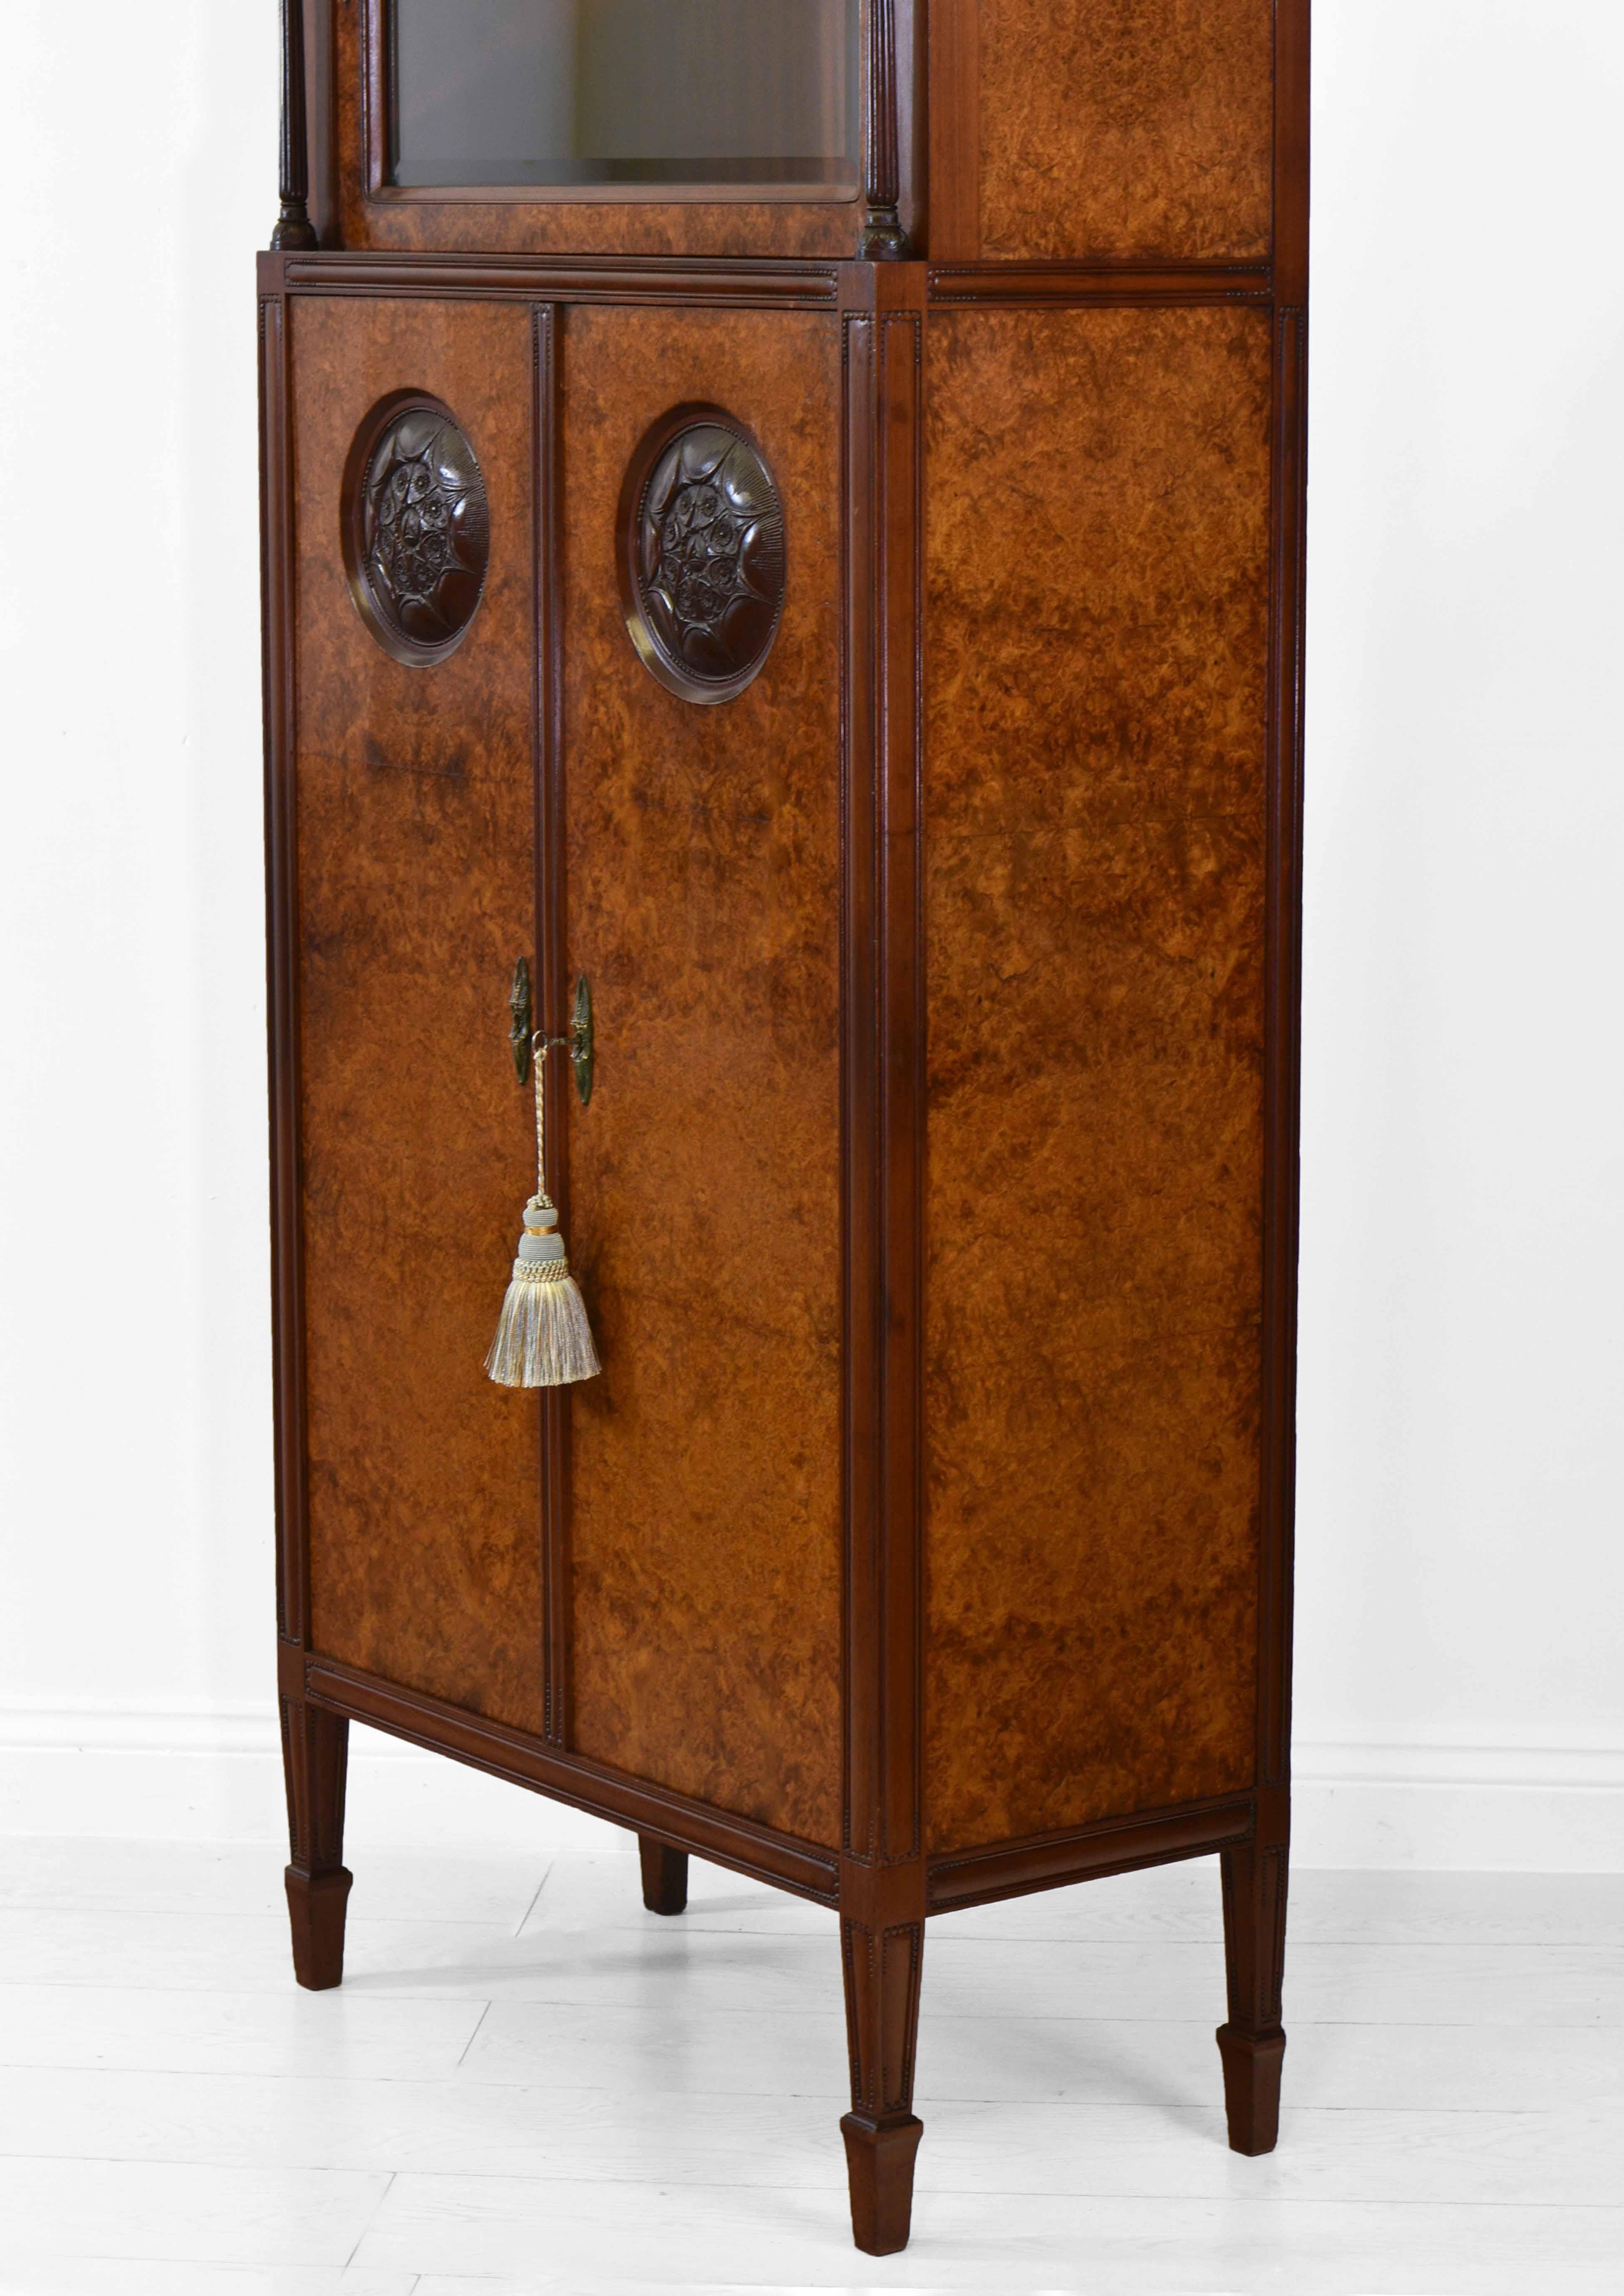 A fine French Art Deco amboyna burl wood cabinet designed by Georges De Bardyère. Signed - Circa 1920.

Free delivery for all areas in mainland England & Wales only. 

*CITES Notice: Due to stringent regulations on the export of materials used, this